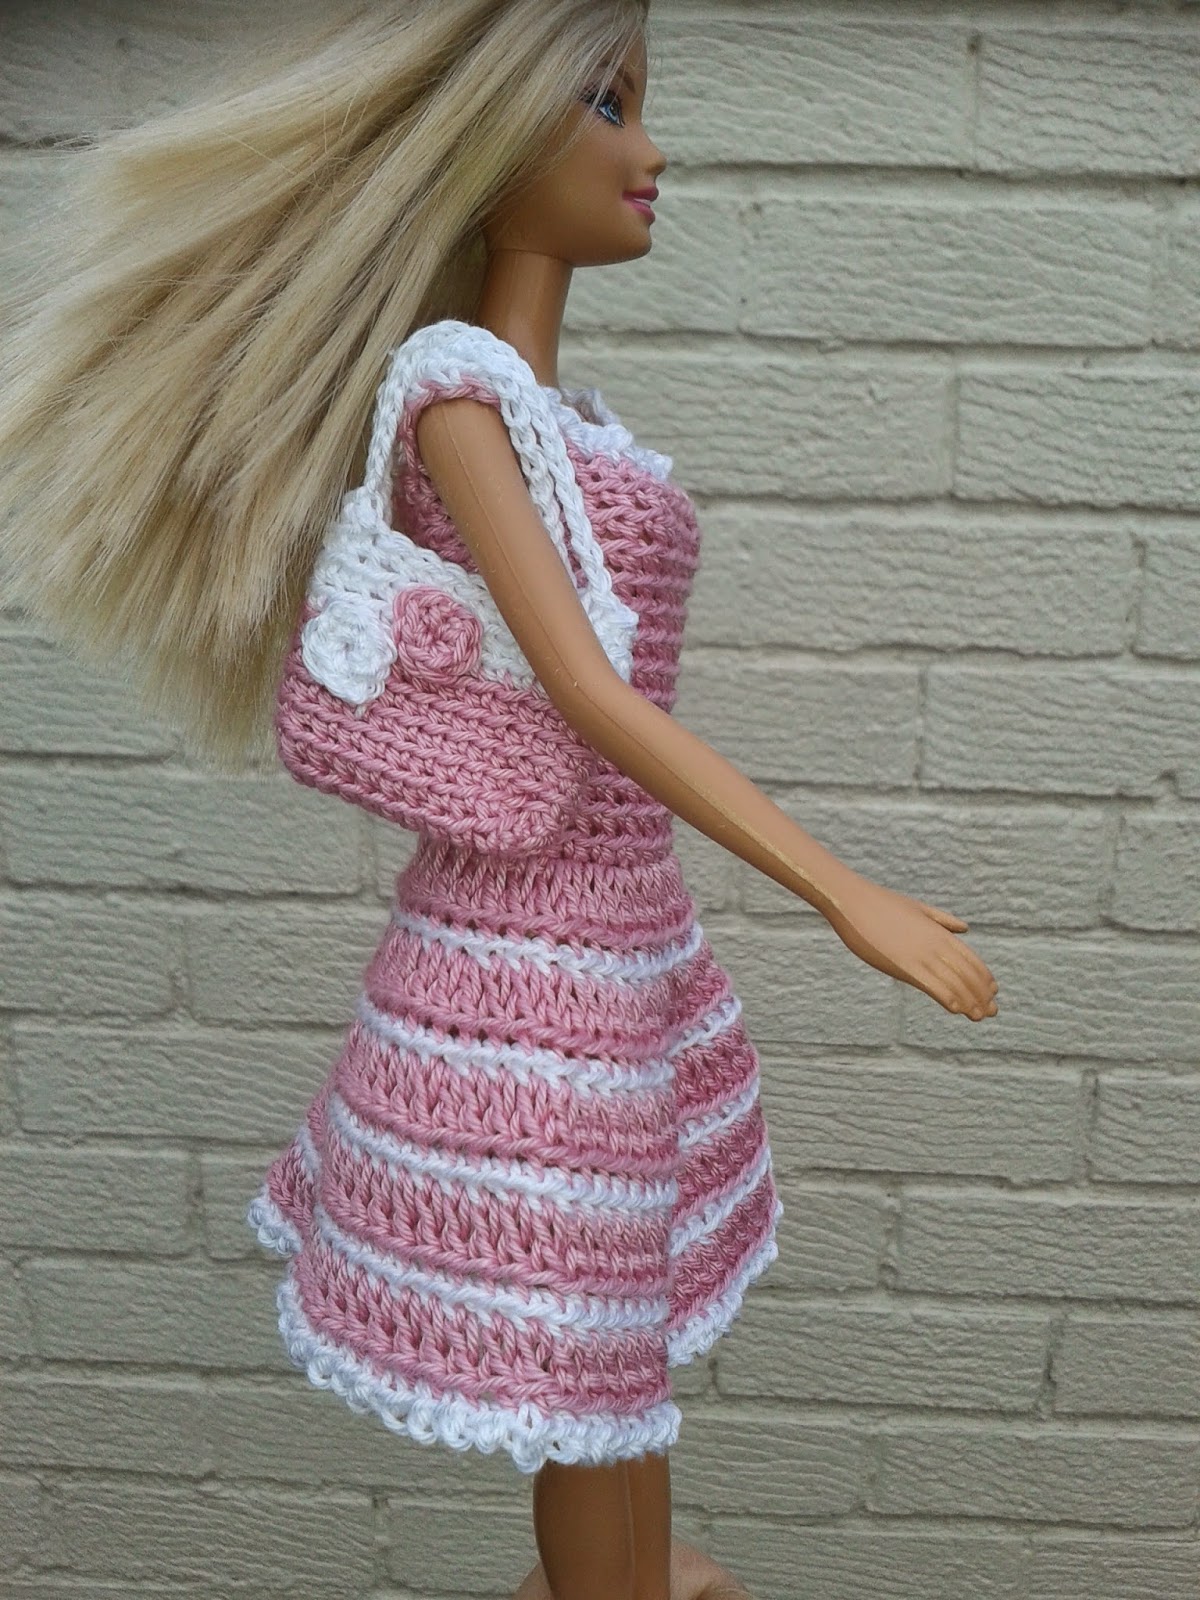 Linmary Knits: Barbie Crochet Dresses And Bag